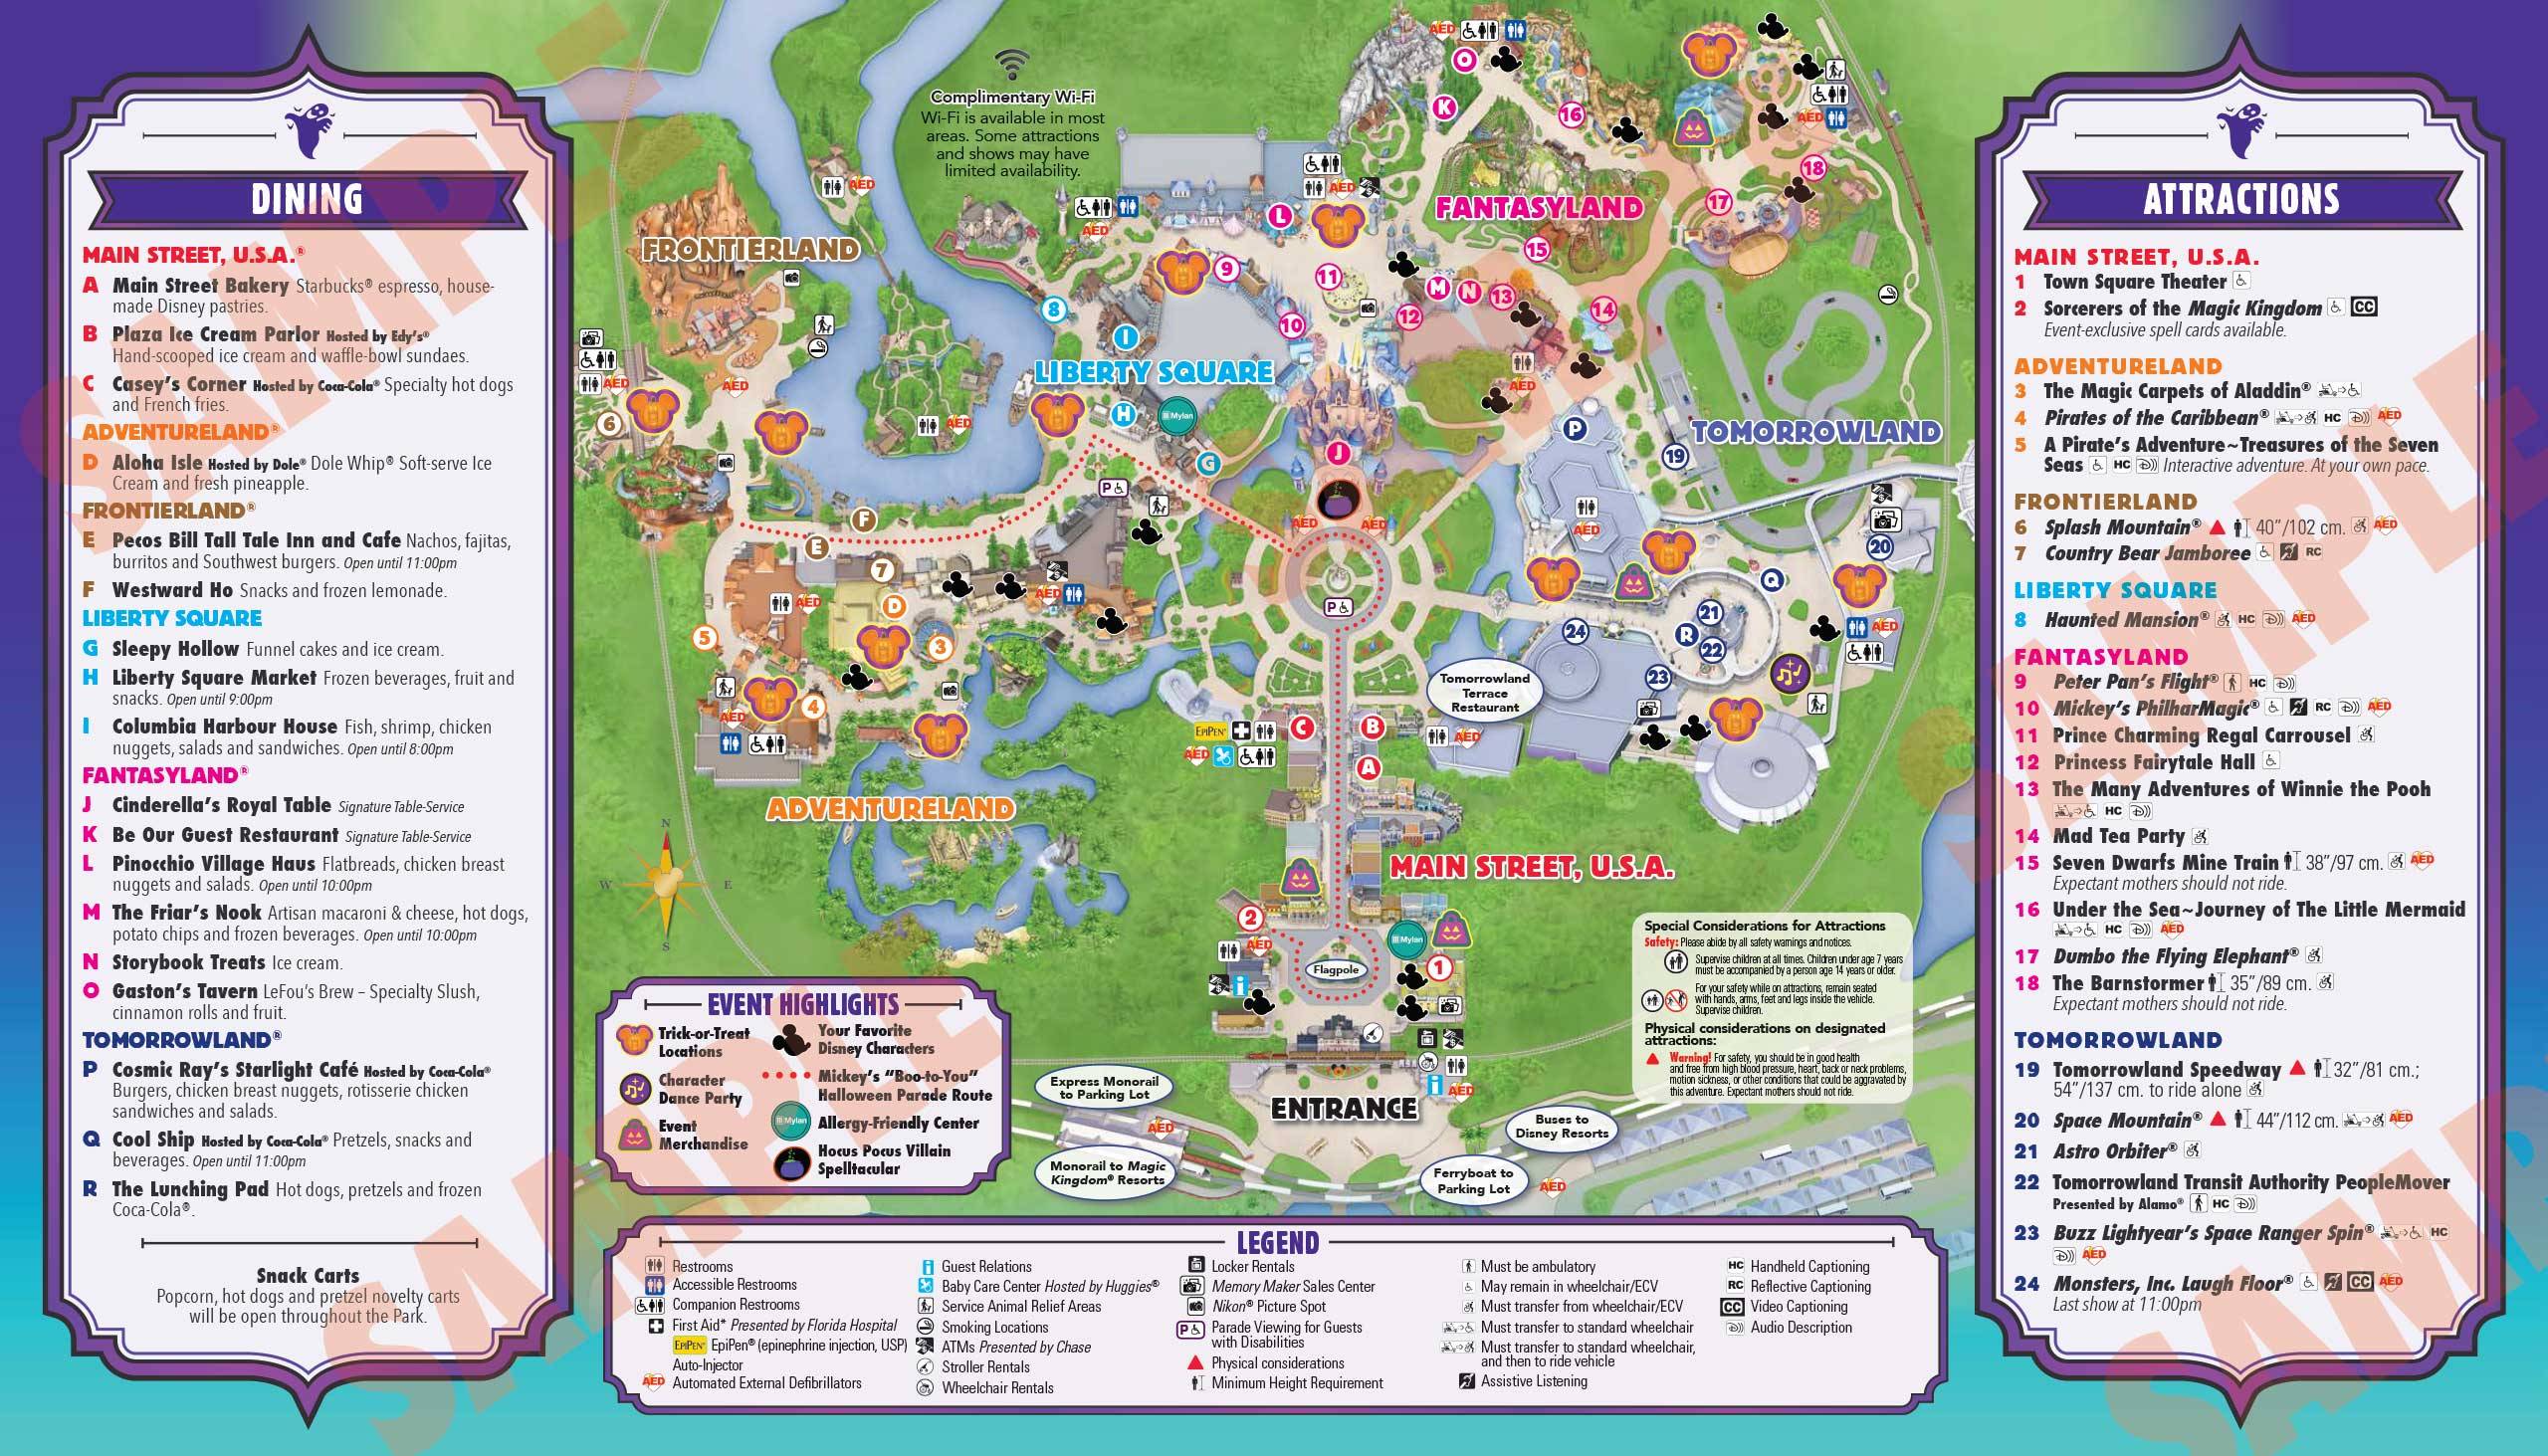 Mickey's Not-So-Scary Halloween Party guide map 2016 - Back